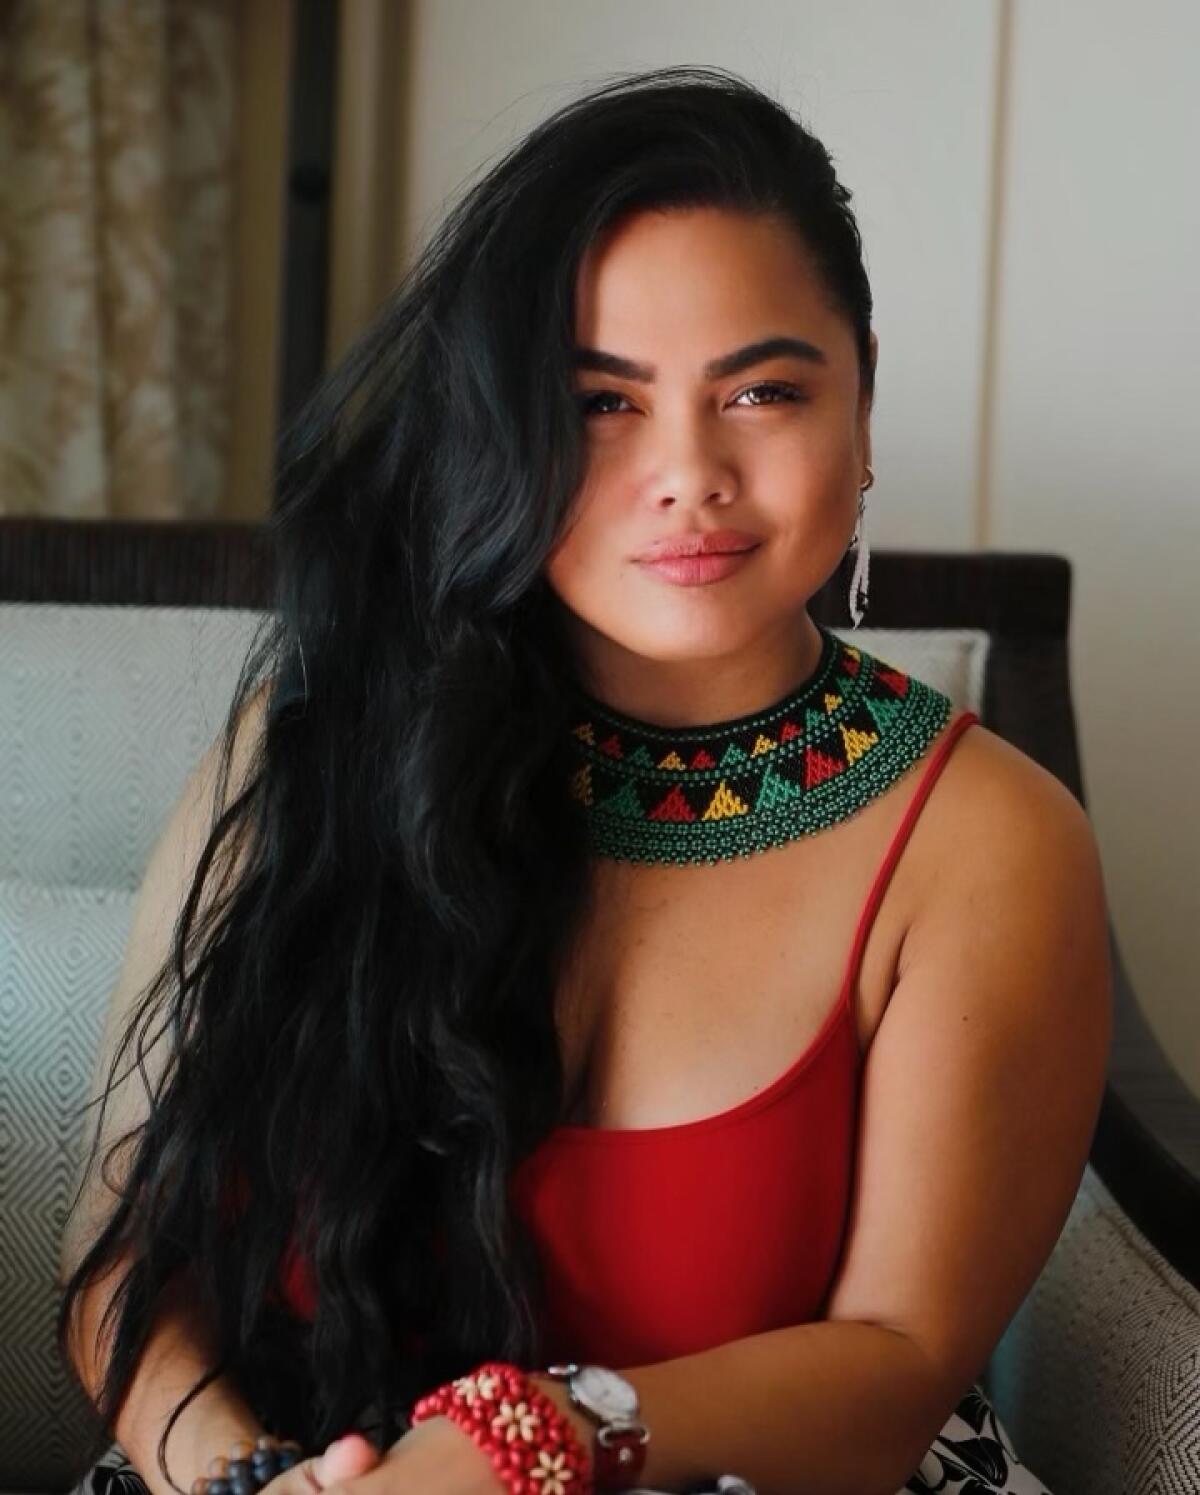 Roslynn Alba Cobarrubias smiles with her hands folded while wearing a red tank top and a colorful patterned necklace